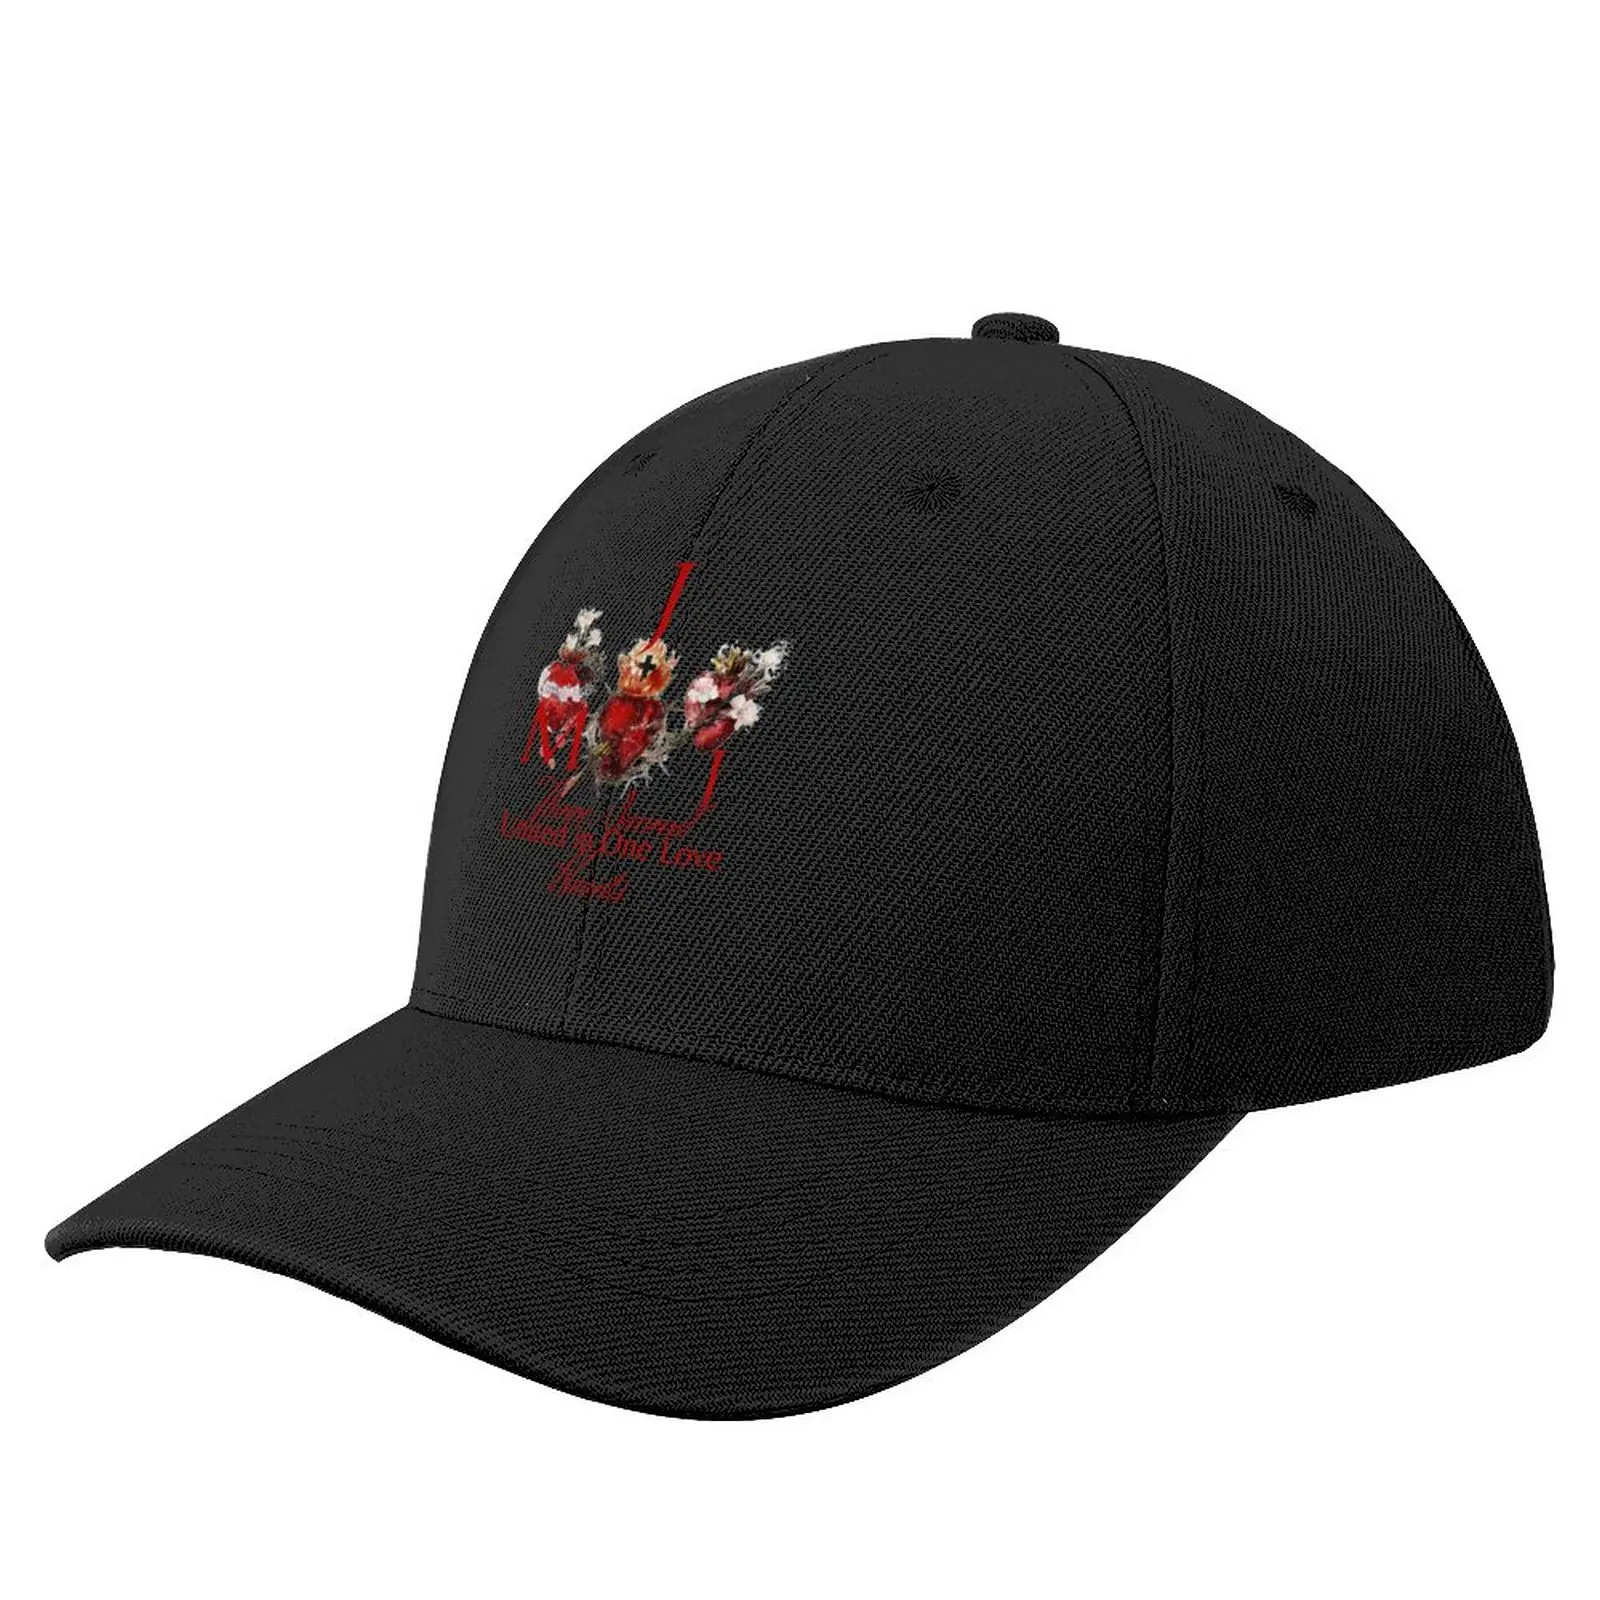 

Sacred Heart of Jesus,Immaculate Heart of Mary, Chaste Heart of St. Joseph, Hearts of the Holy Family Baseball Cap